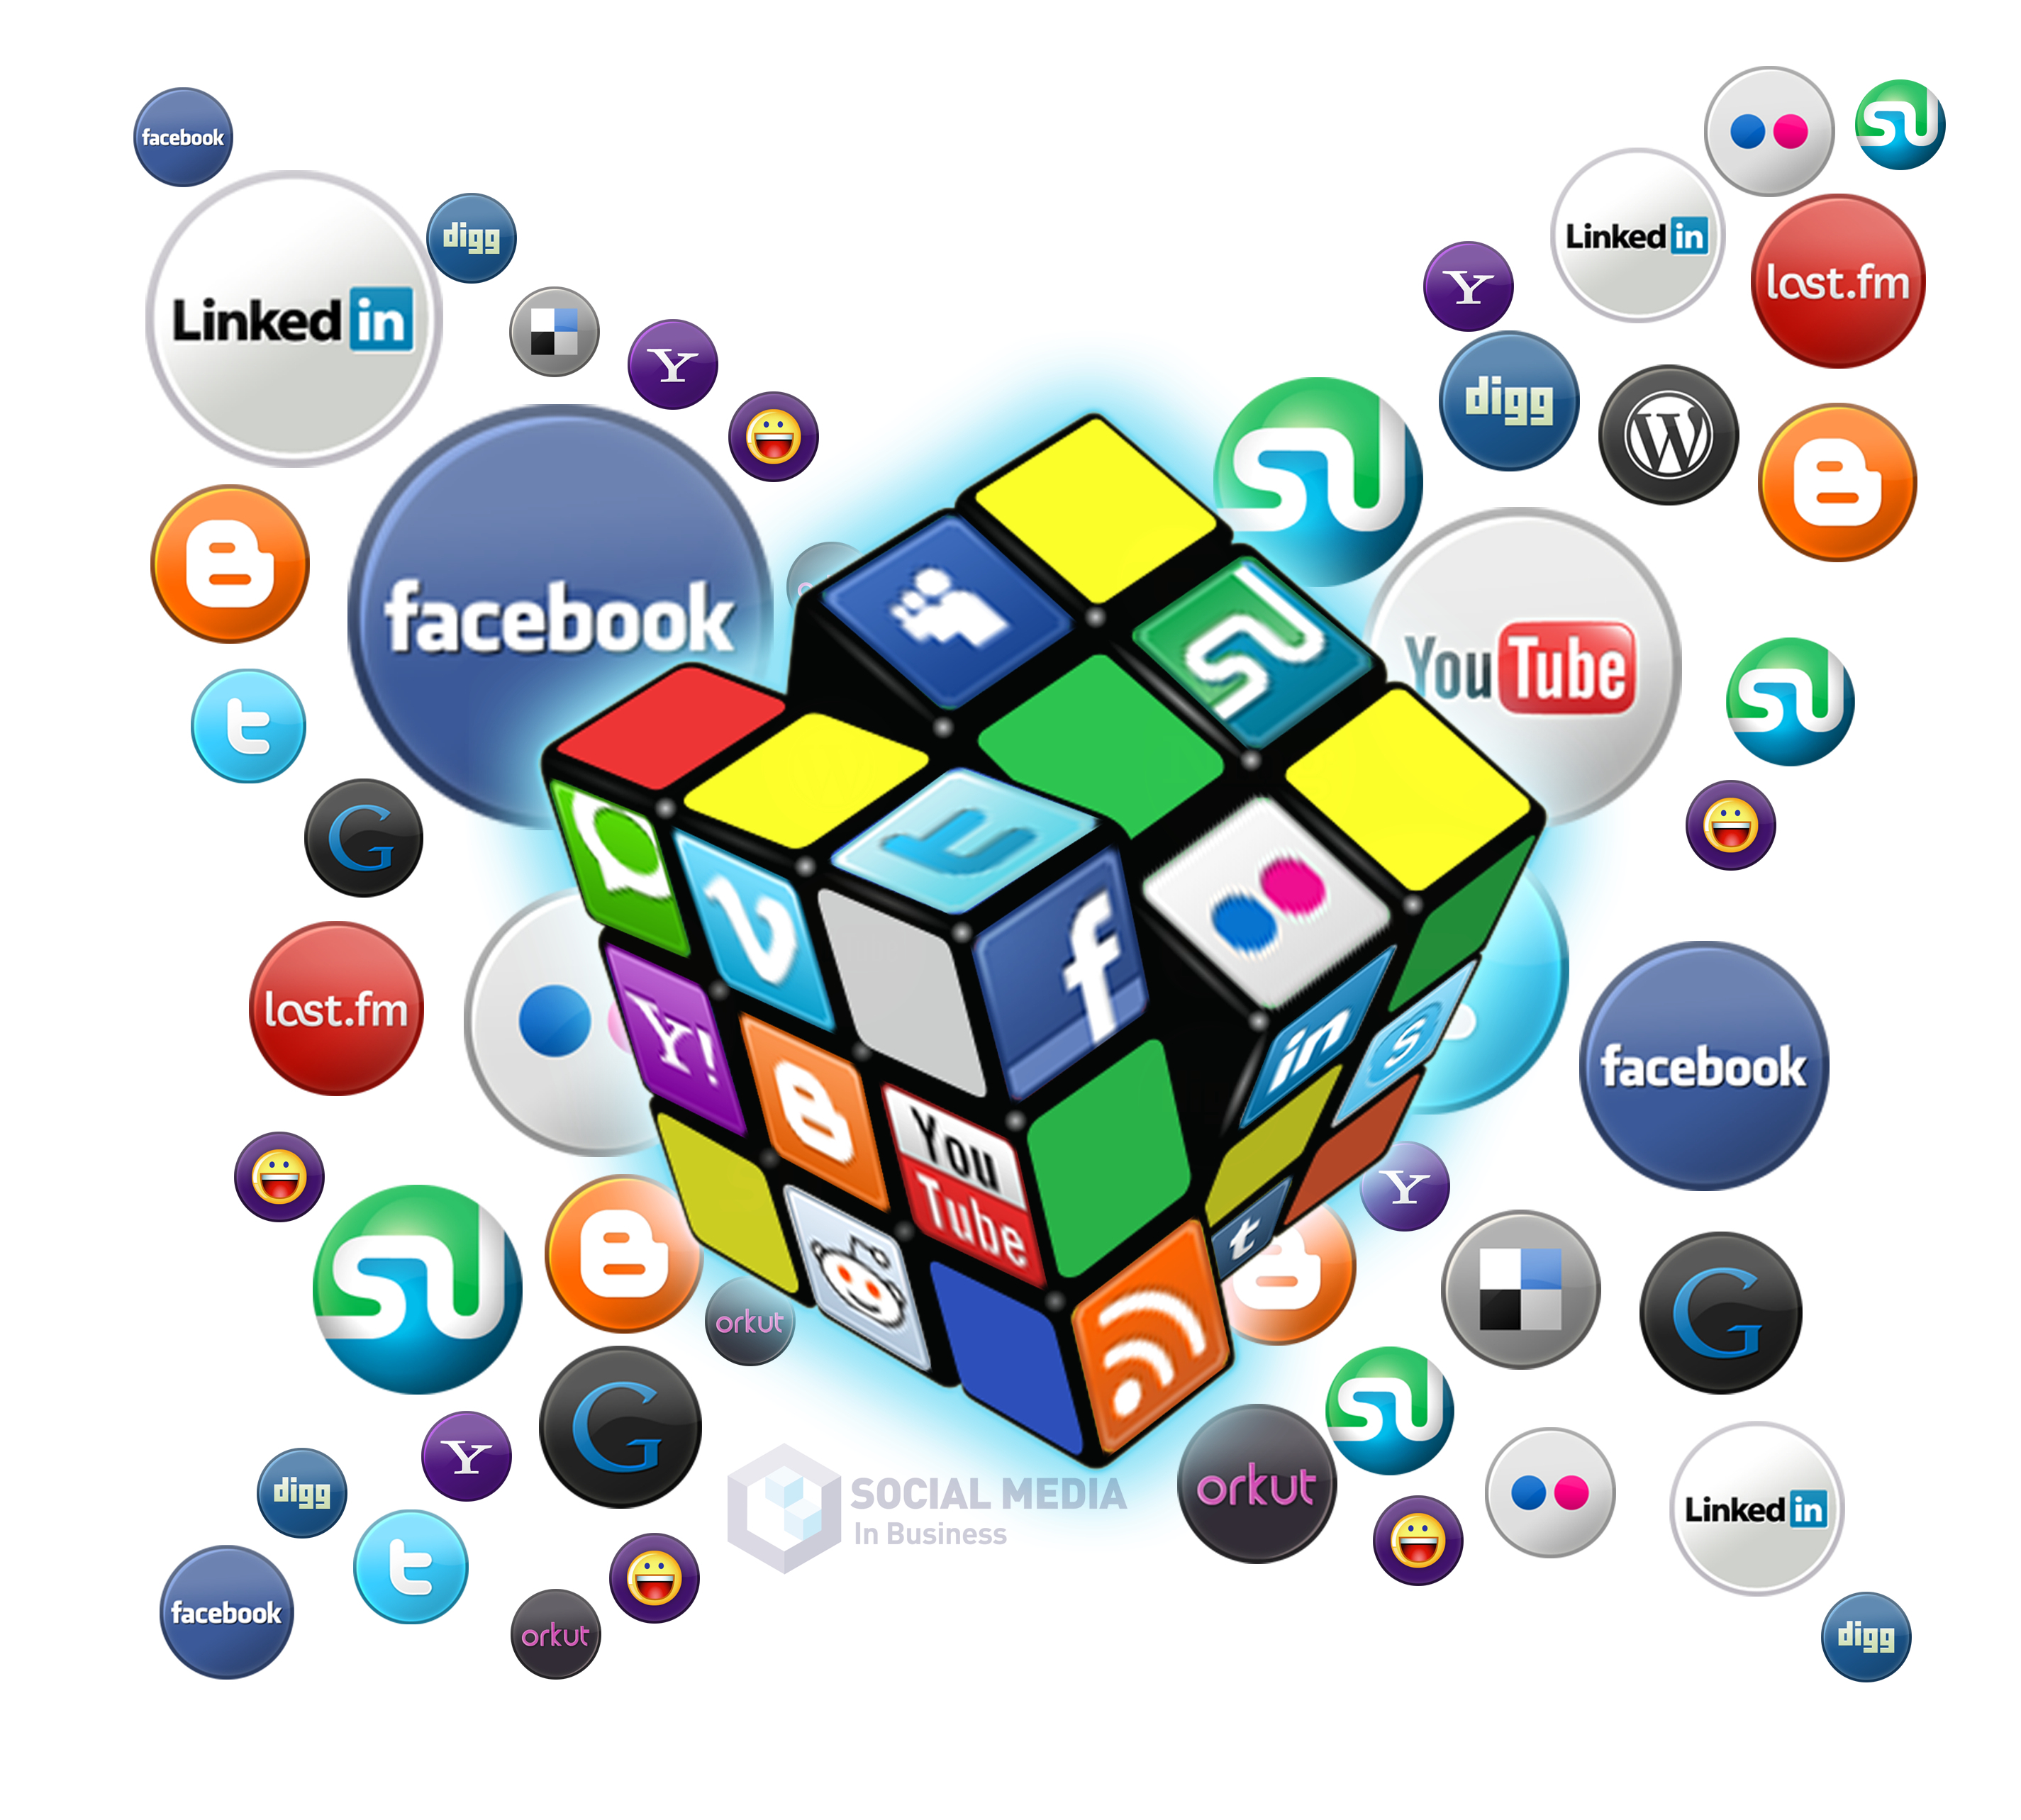 Three Things That All Social Networks Have In Common - Business2Community